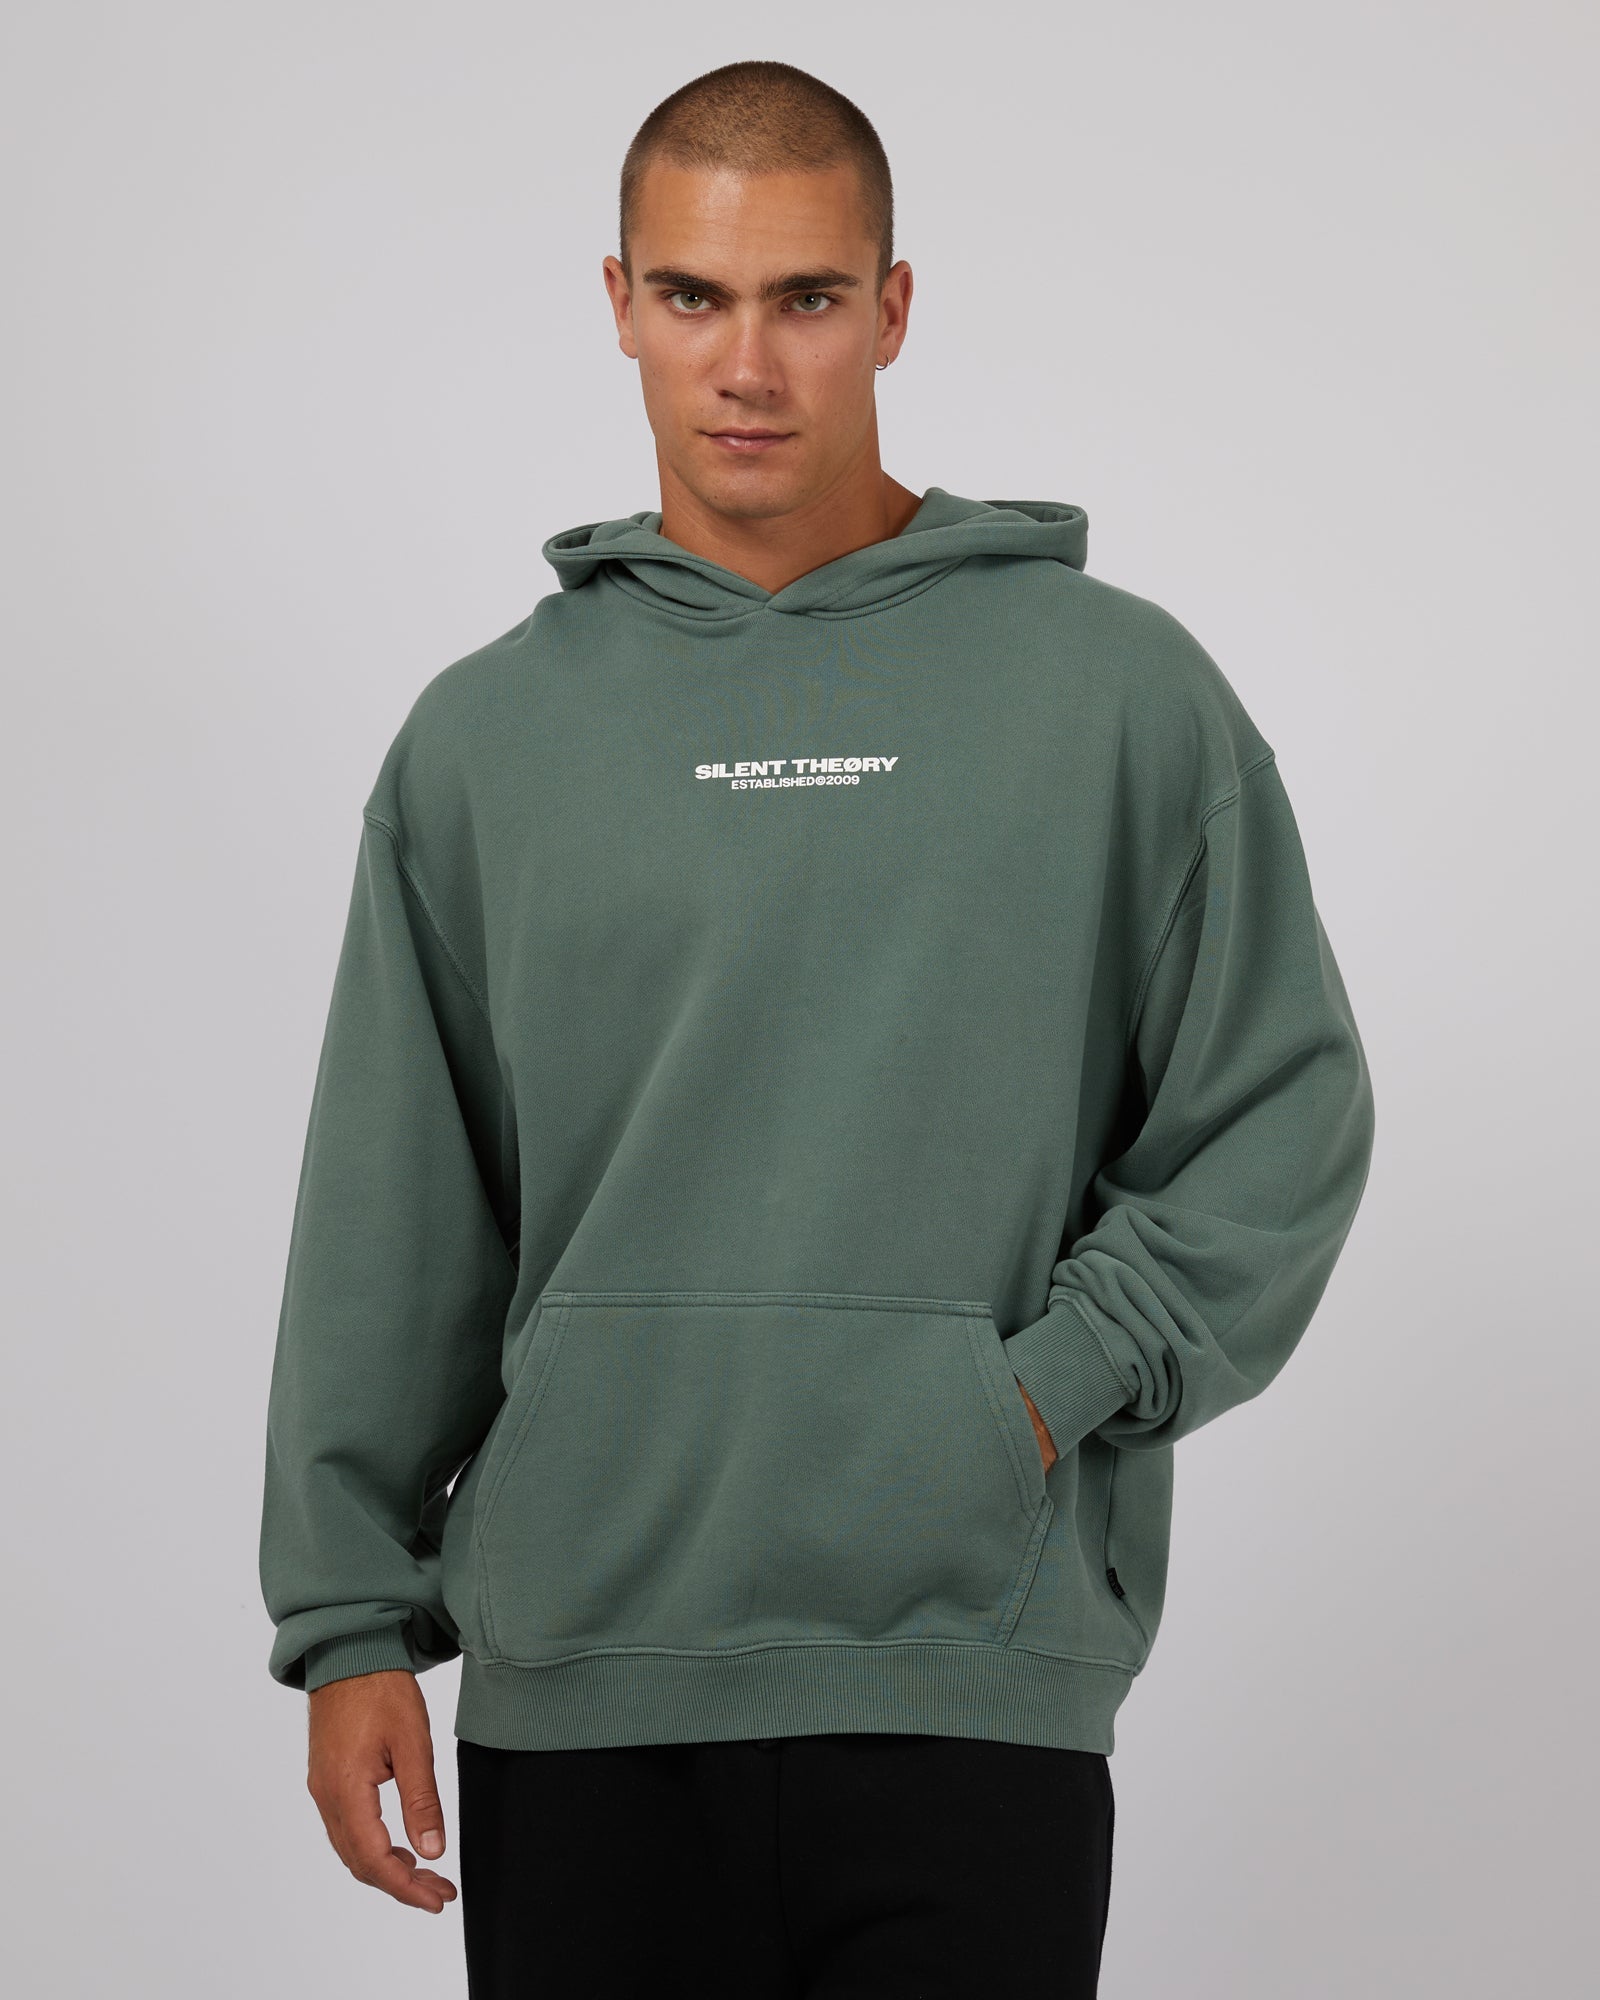 Silent Theory-Essential Theory Hoody Green-Edge Clothing